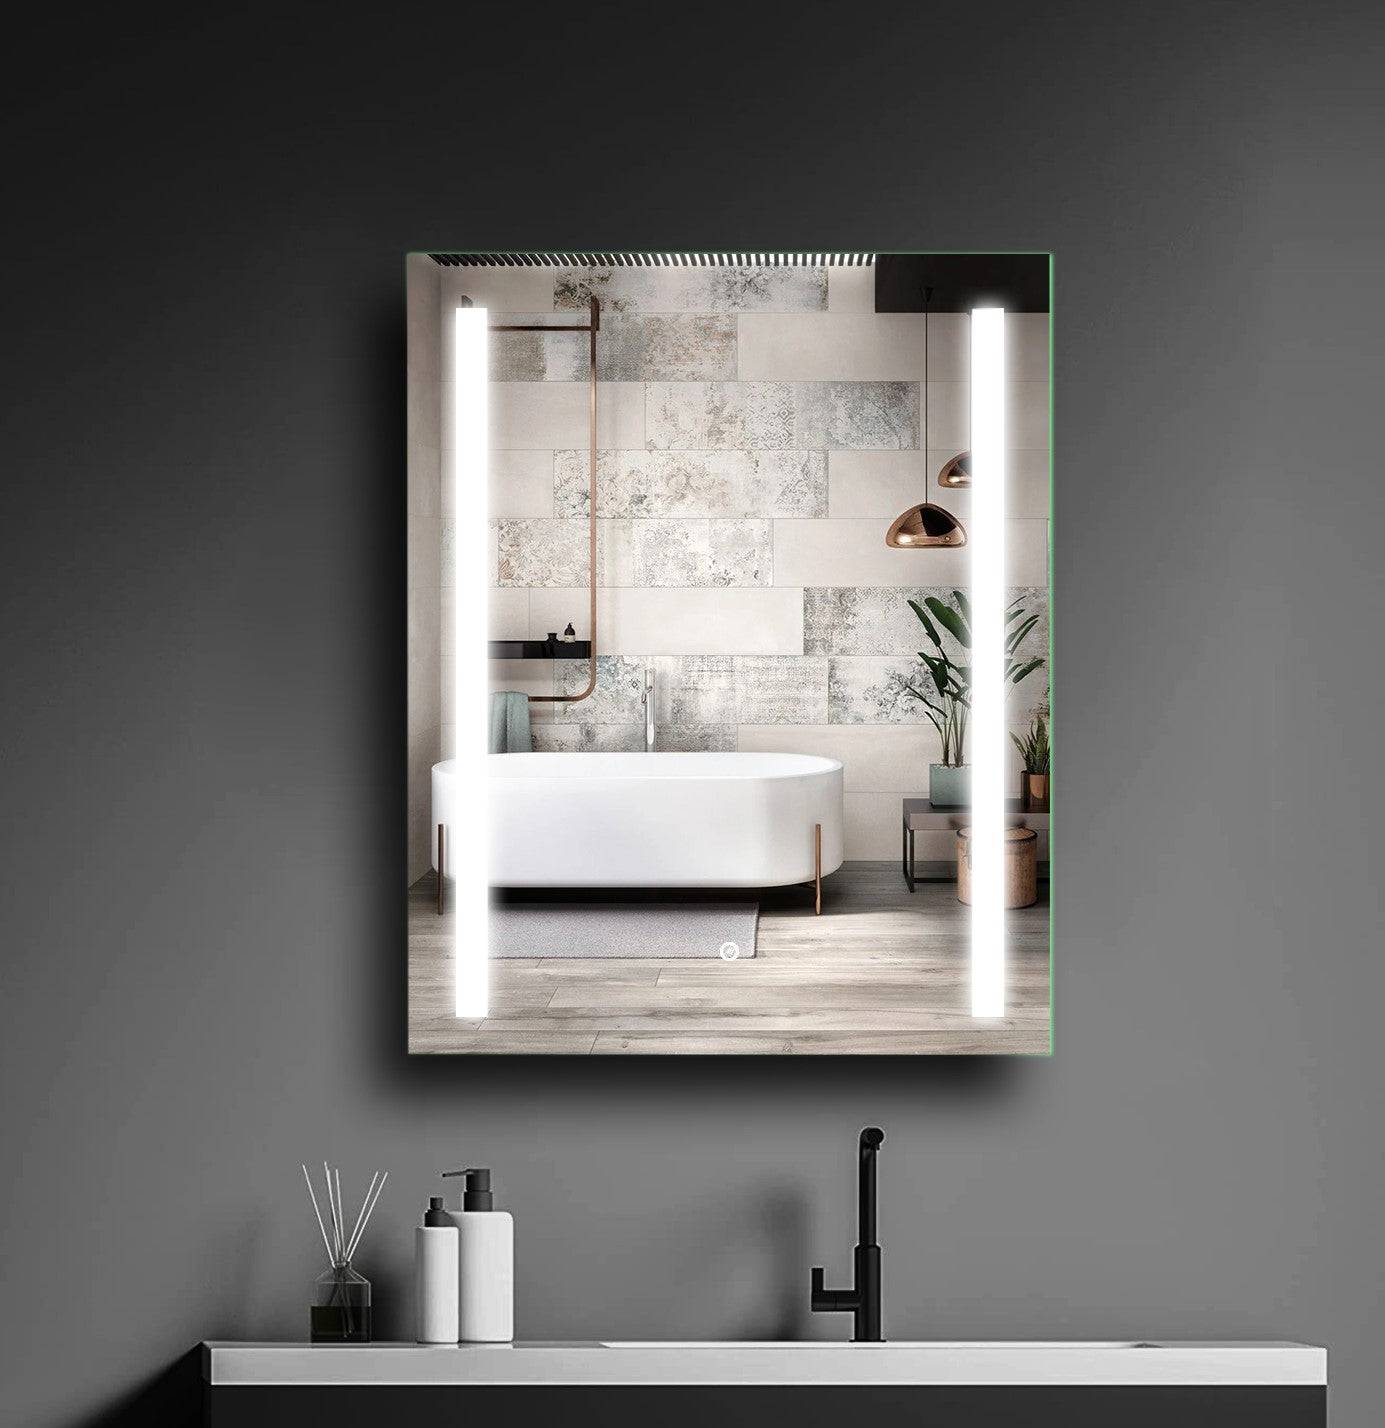 ELL Case Series-Single Door -Modern LED Bathroom Mirror with Defogger, Shelves, USB Charger, and Touch Switch - Sleek Design, Adjustable Color Temperature, Surface or Recess Mounting - ETL Listed and IP44 Rated - Eco LED Lightings 